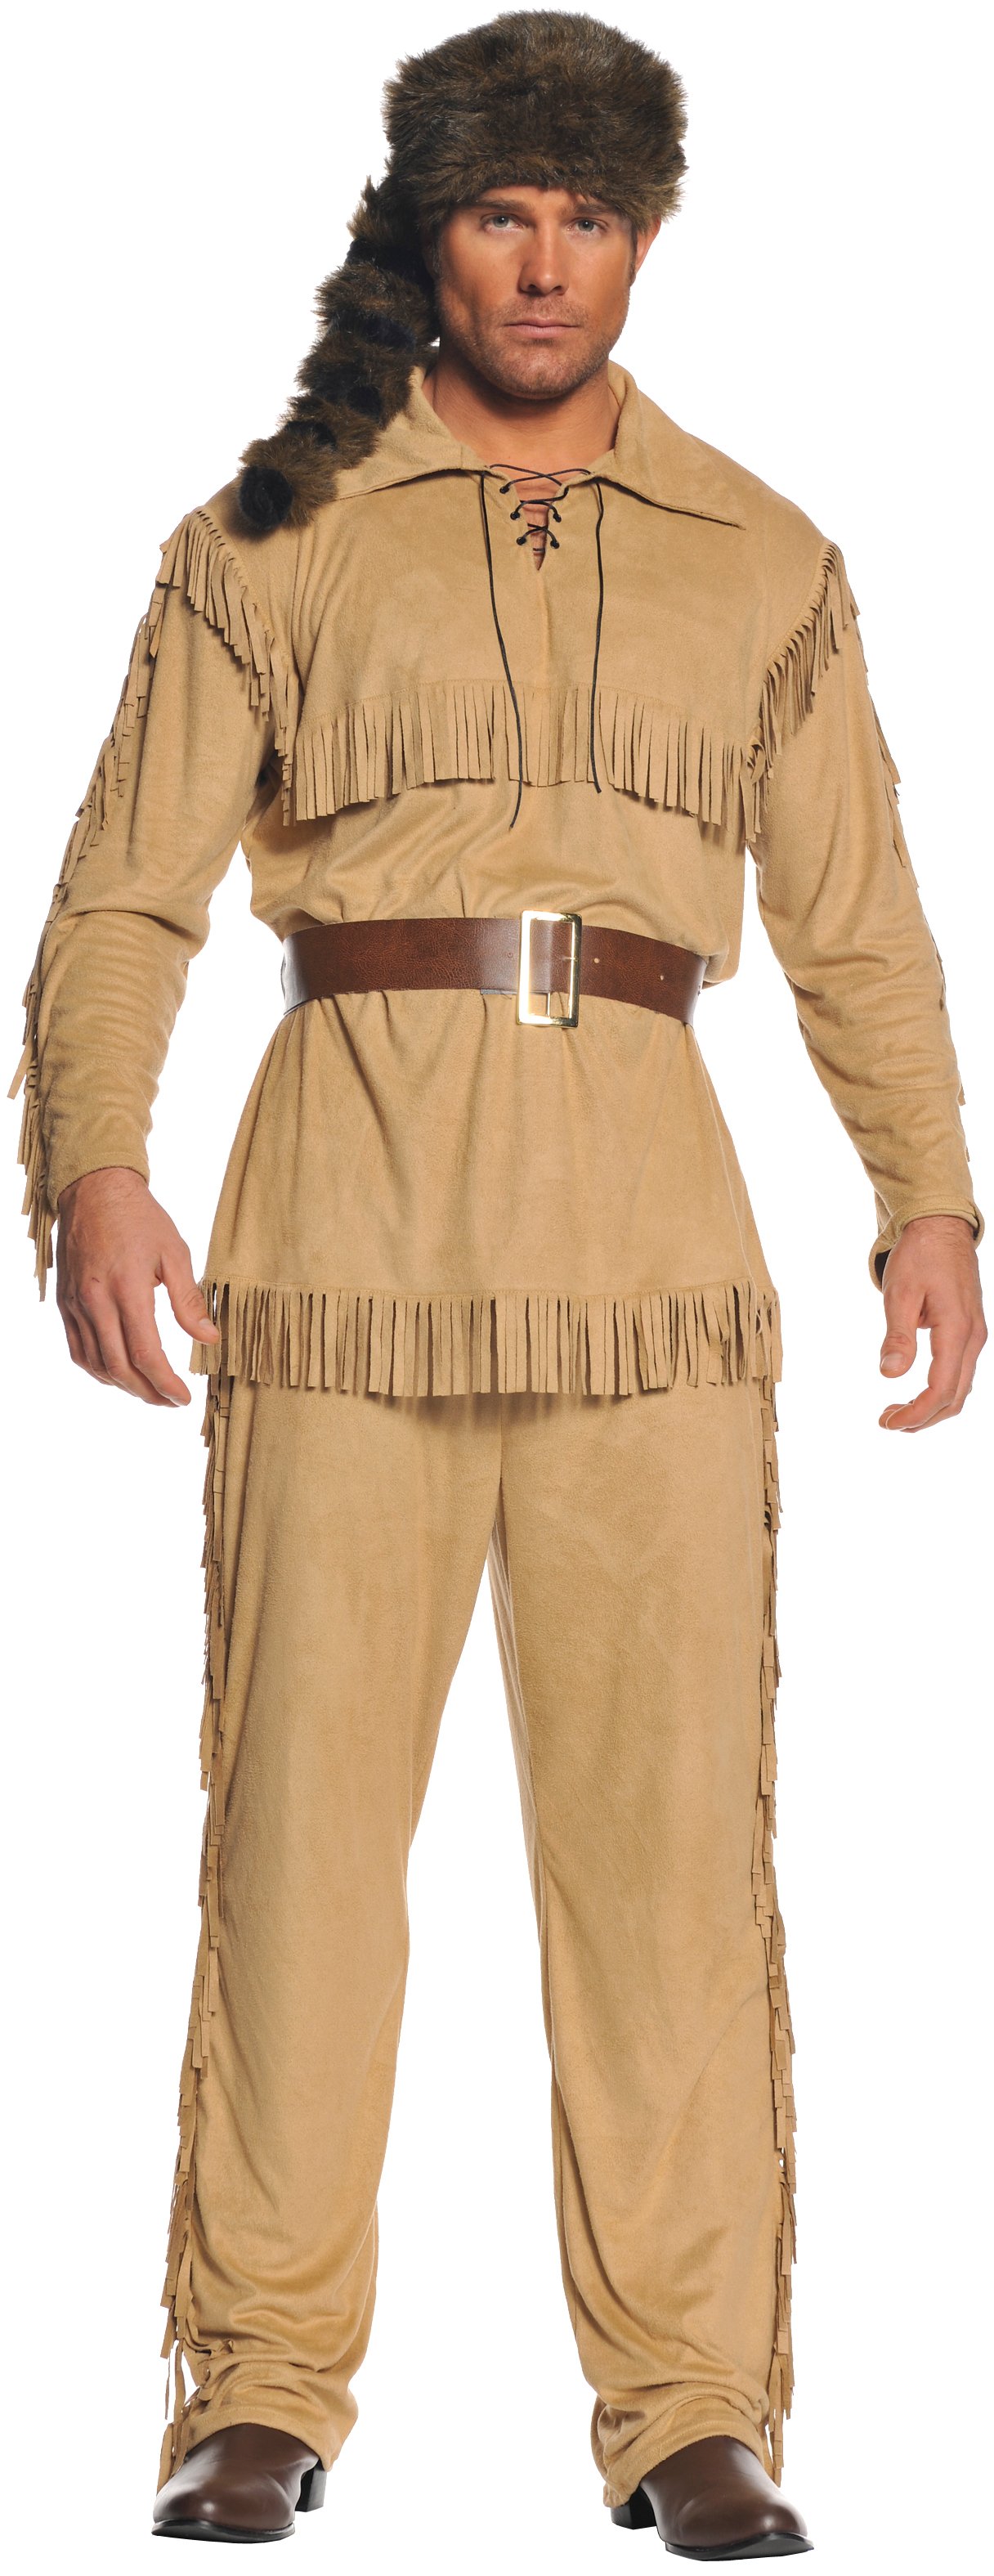 Frontier Man Adult Costume - Click Image to Close